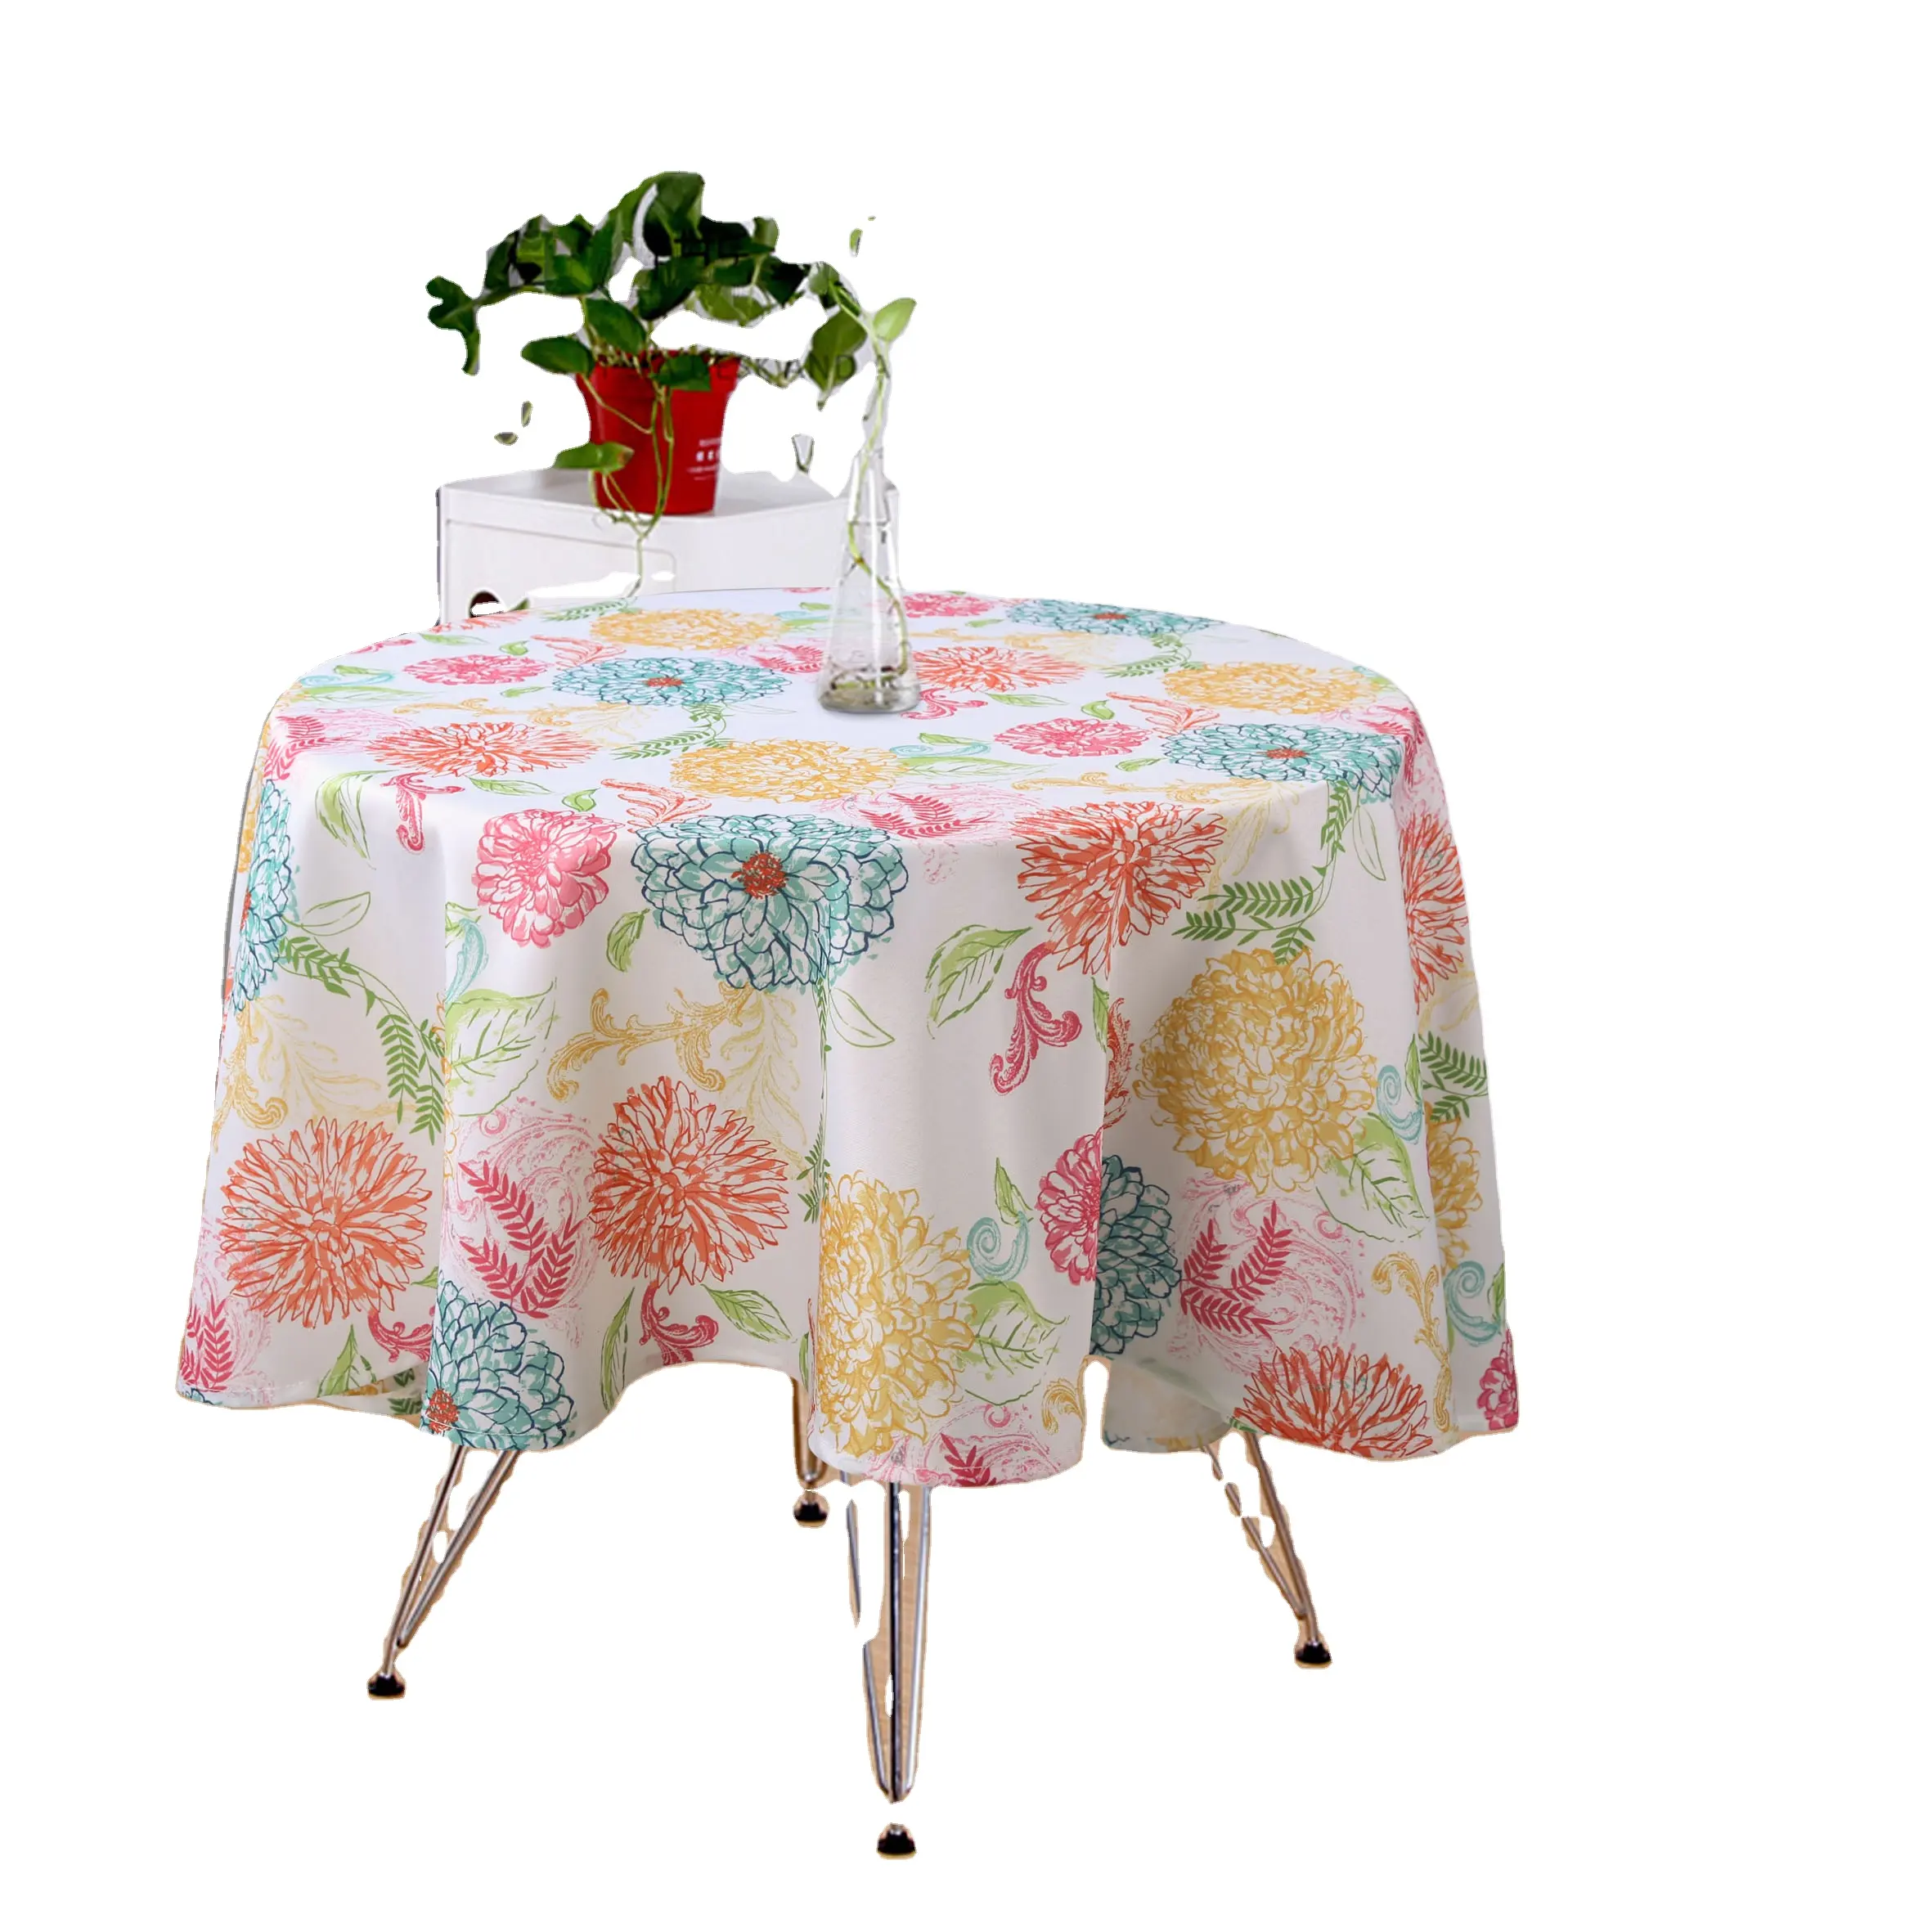 Factory round polyester tablecloth table cover Thick tea table cloth for home party wedding decoration,tablecloth